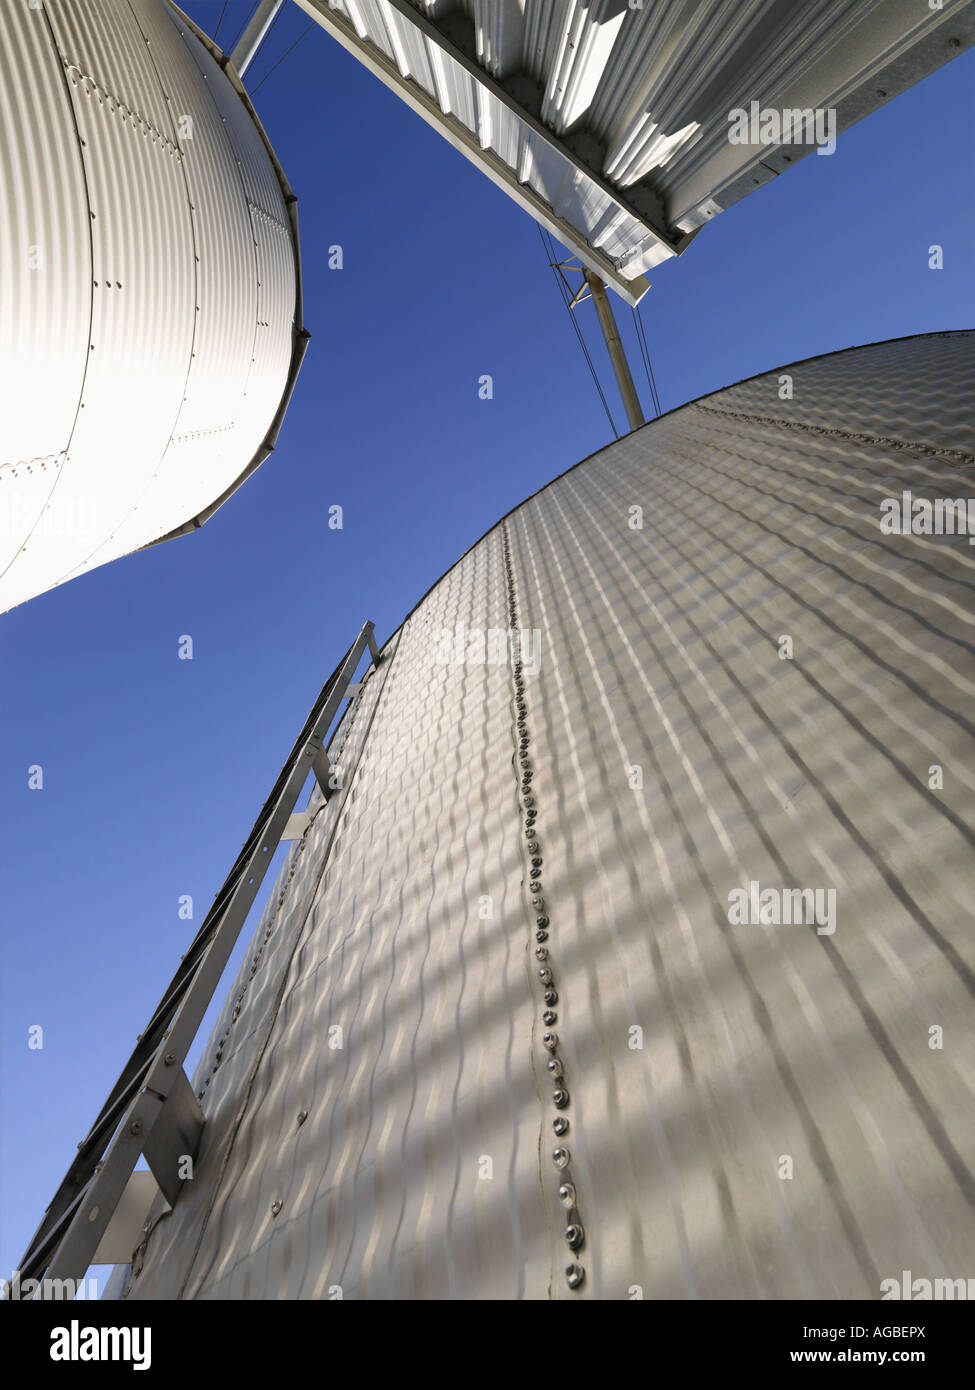 Low angle view of metal grain storage silos against blue sky Stock Photo